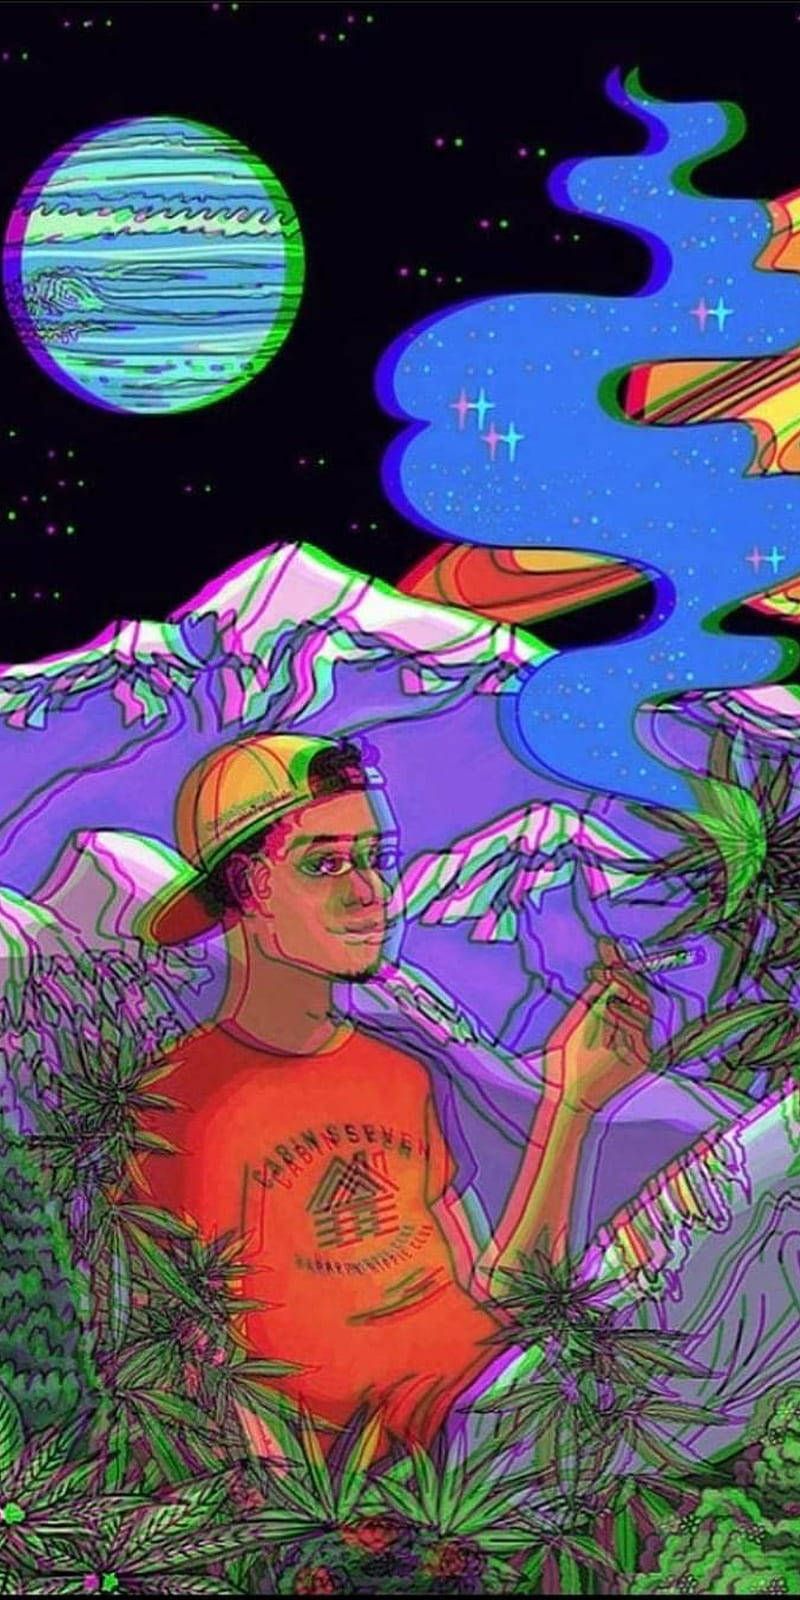 A trippy aesthetic background image of a man smoking in a field of weed - Trippy